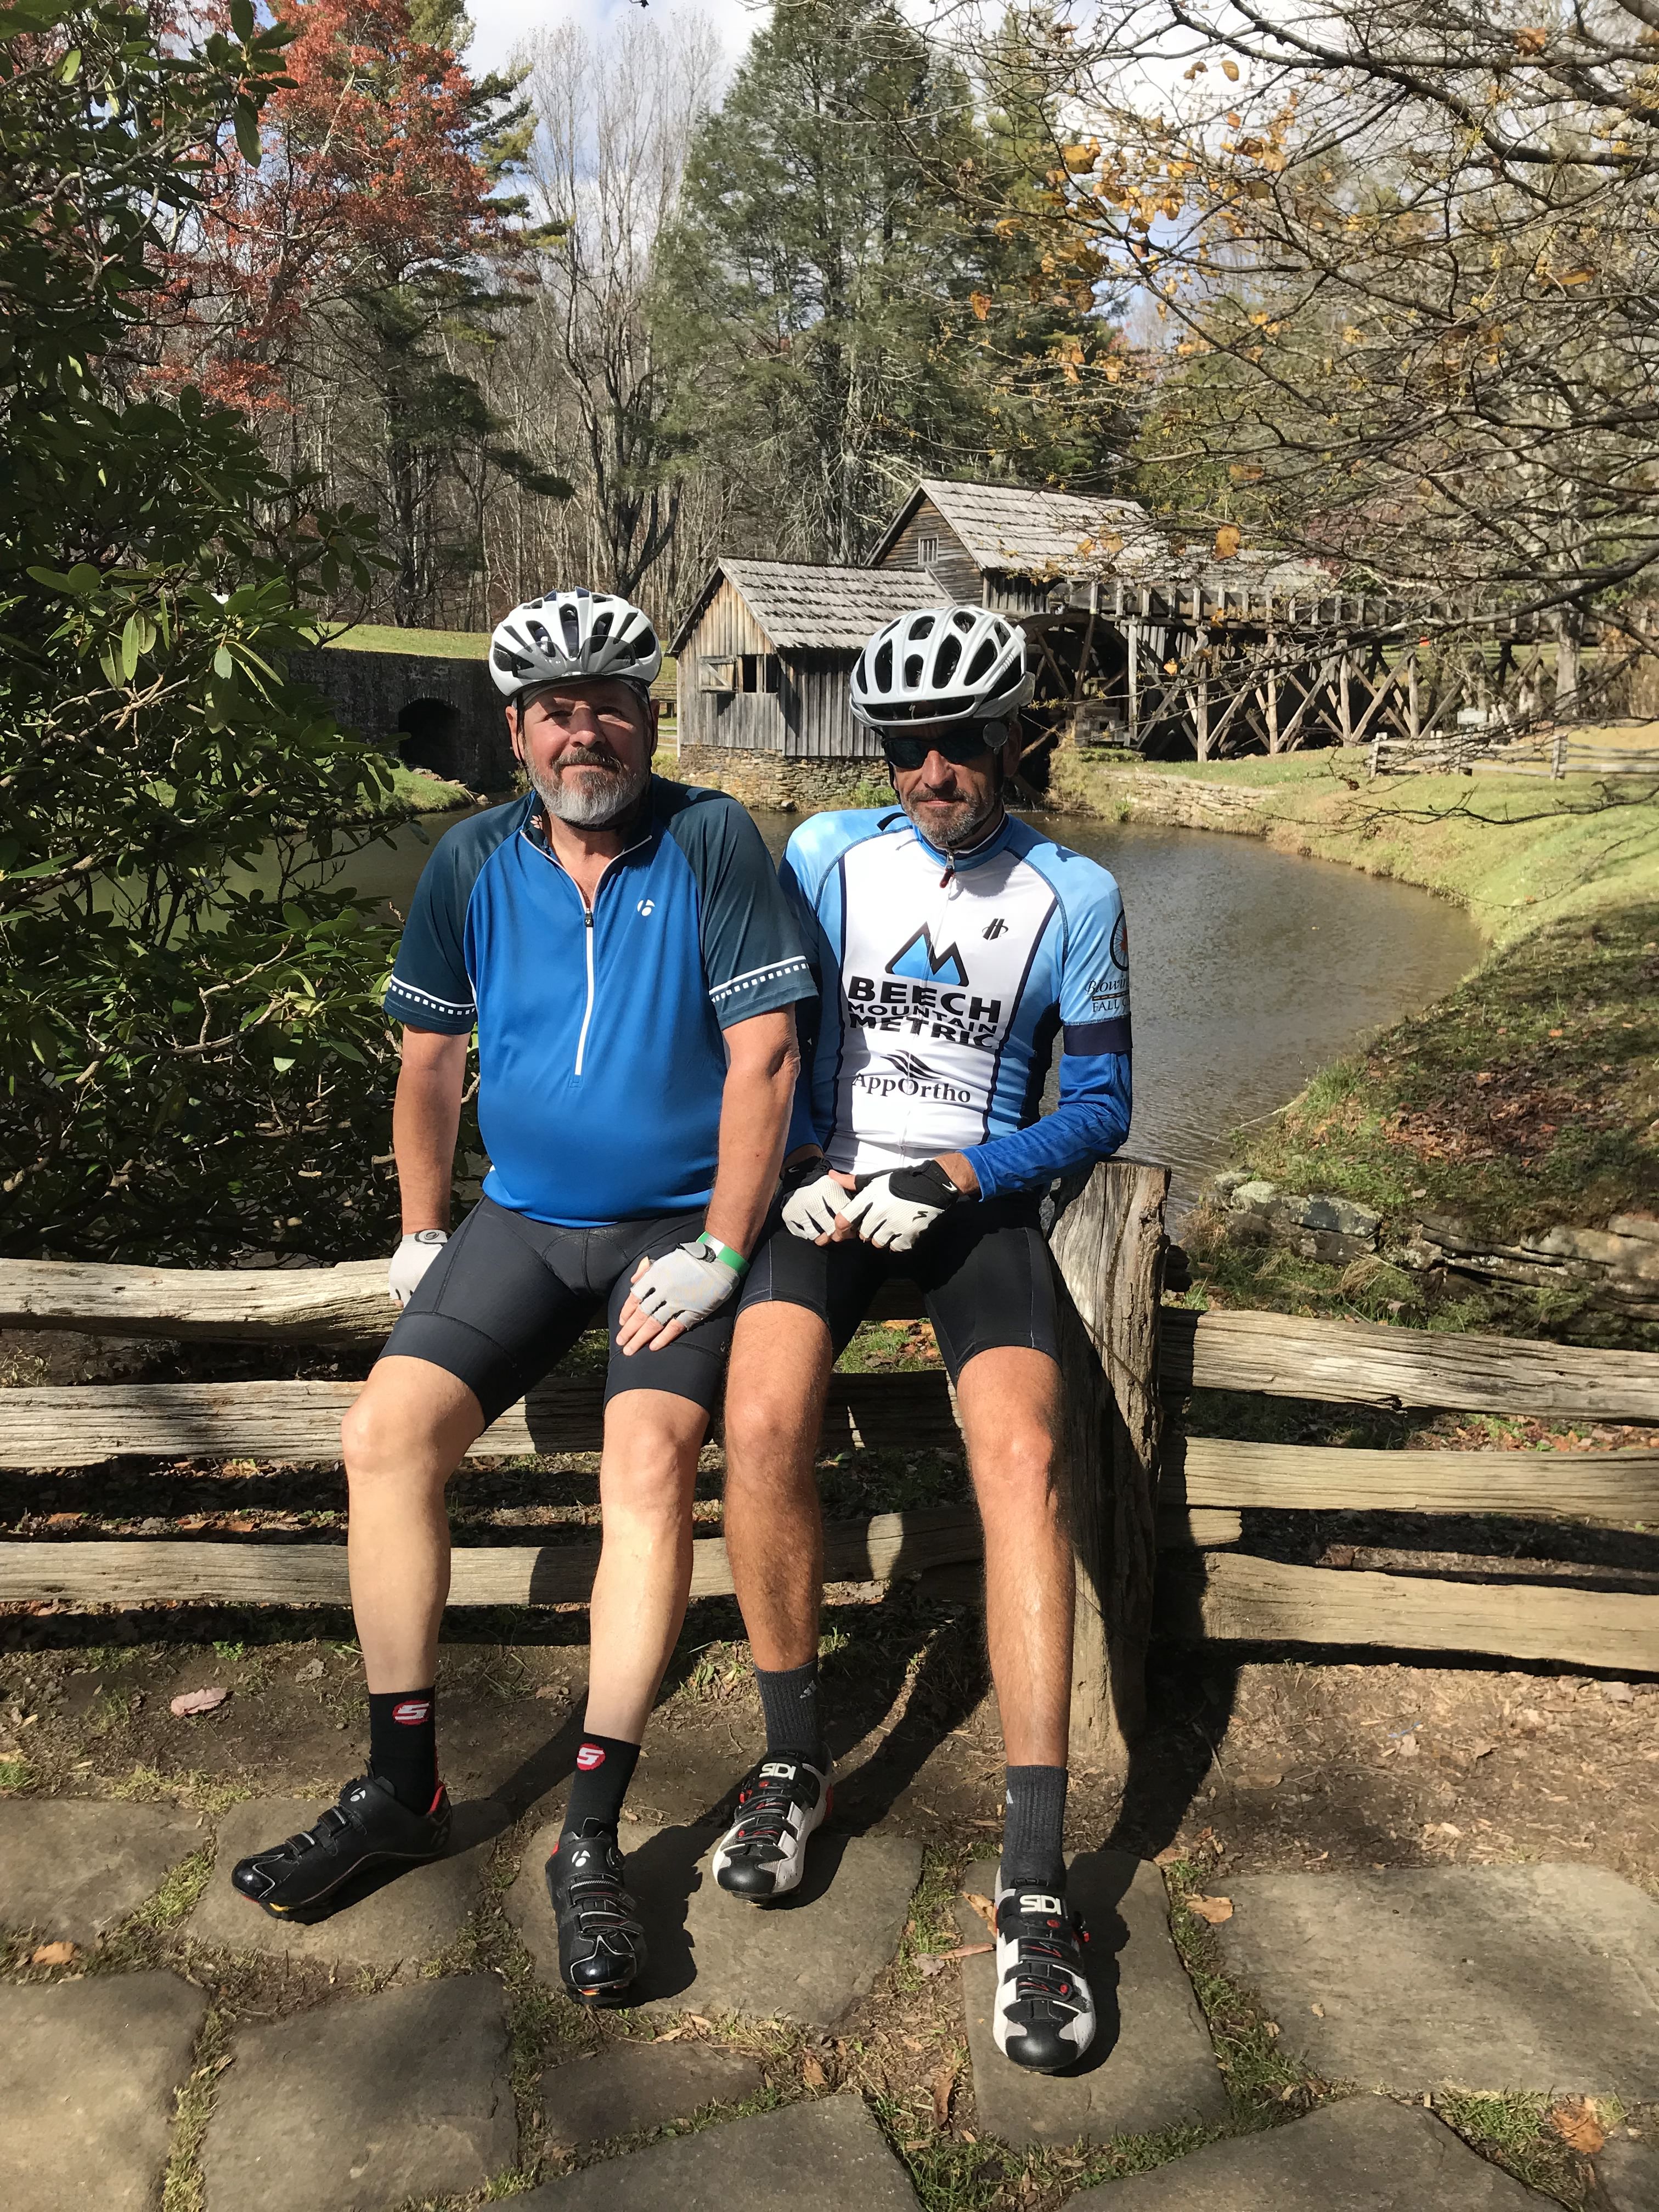 Cyclists at Mabry Mill